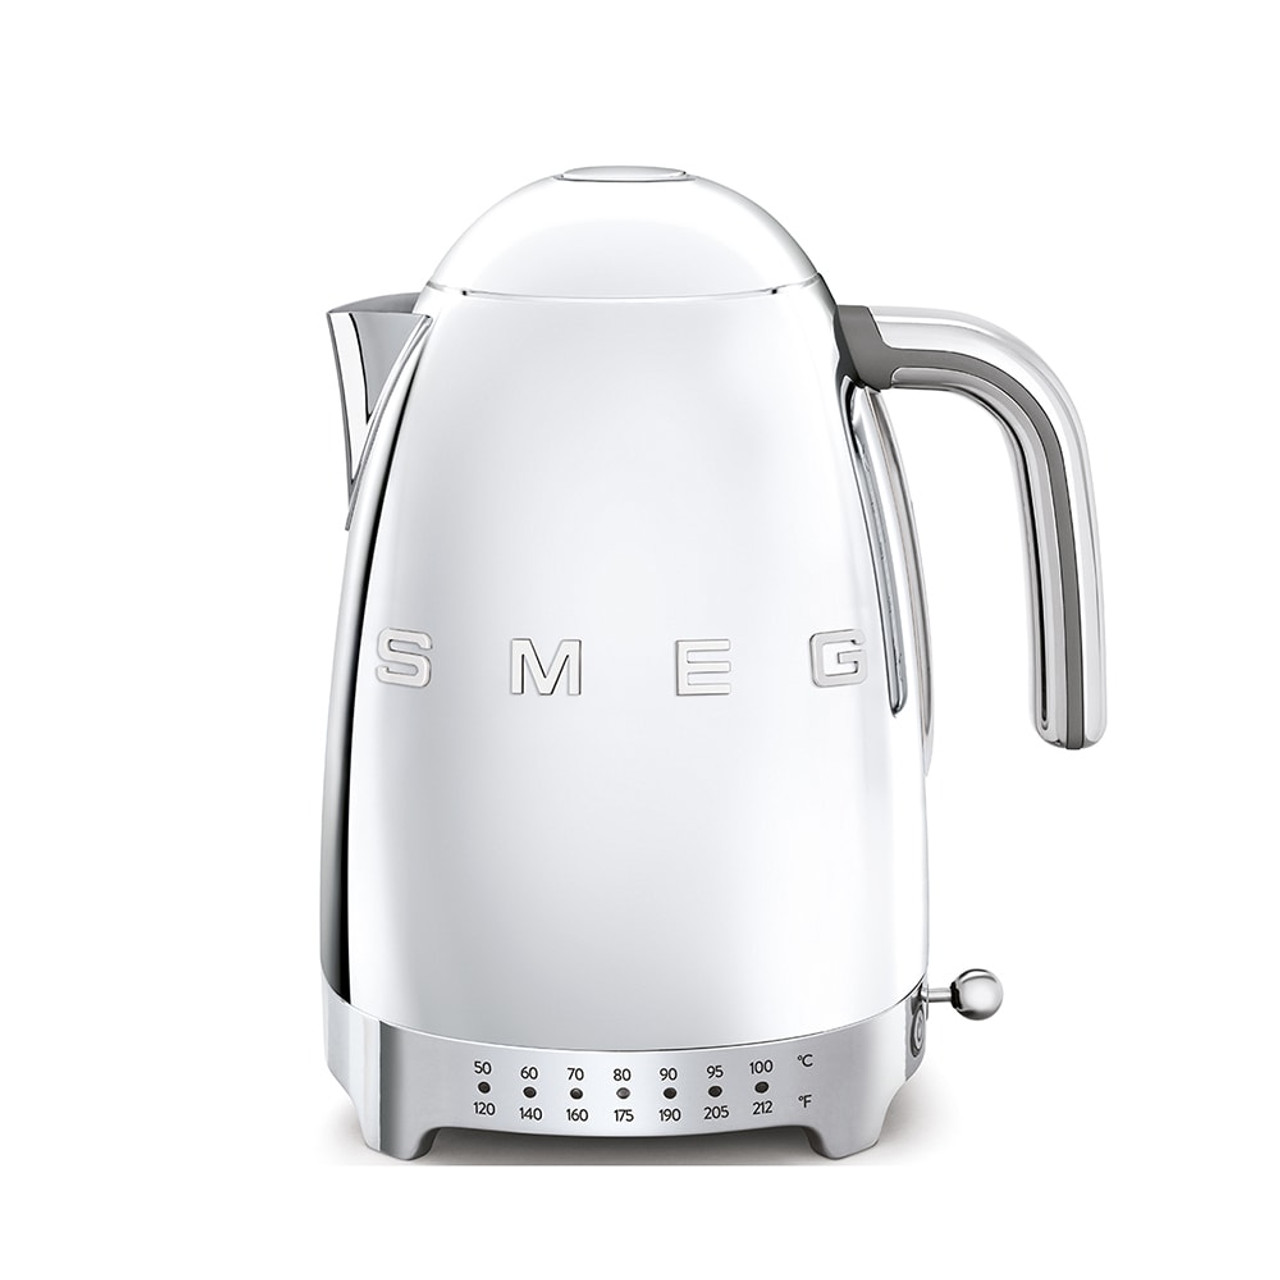 https://cdn11.bigcommerce.com/s-hccytny0od/images/stencil/1280x1280/products/2504/8619/smeg-variable-temperature-kettle-stainless__88298.1693925579.jpg?c=2?imbypass=on